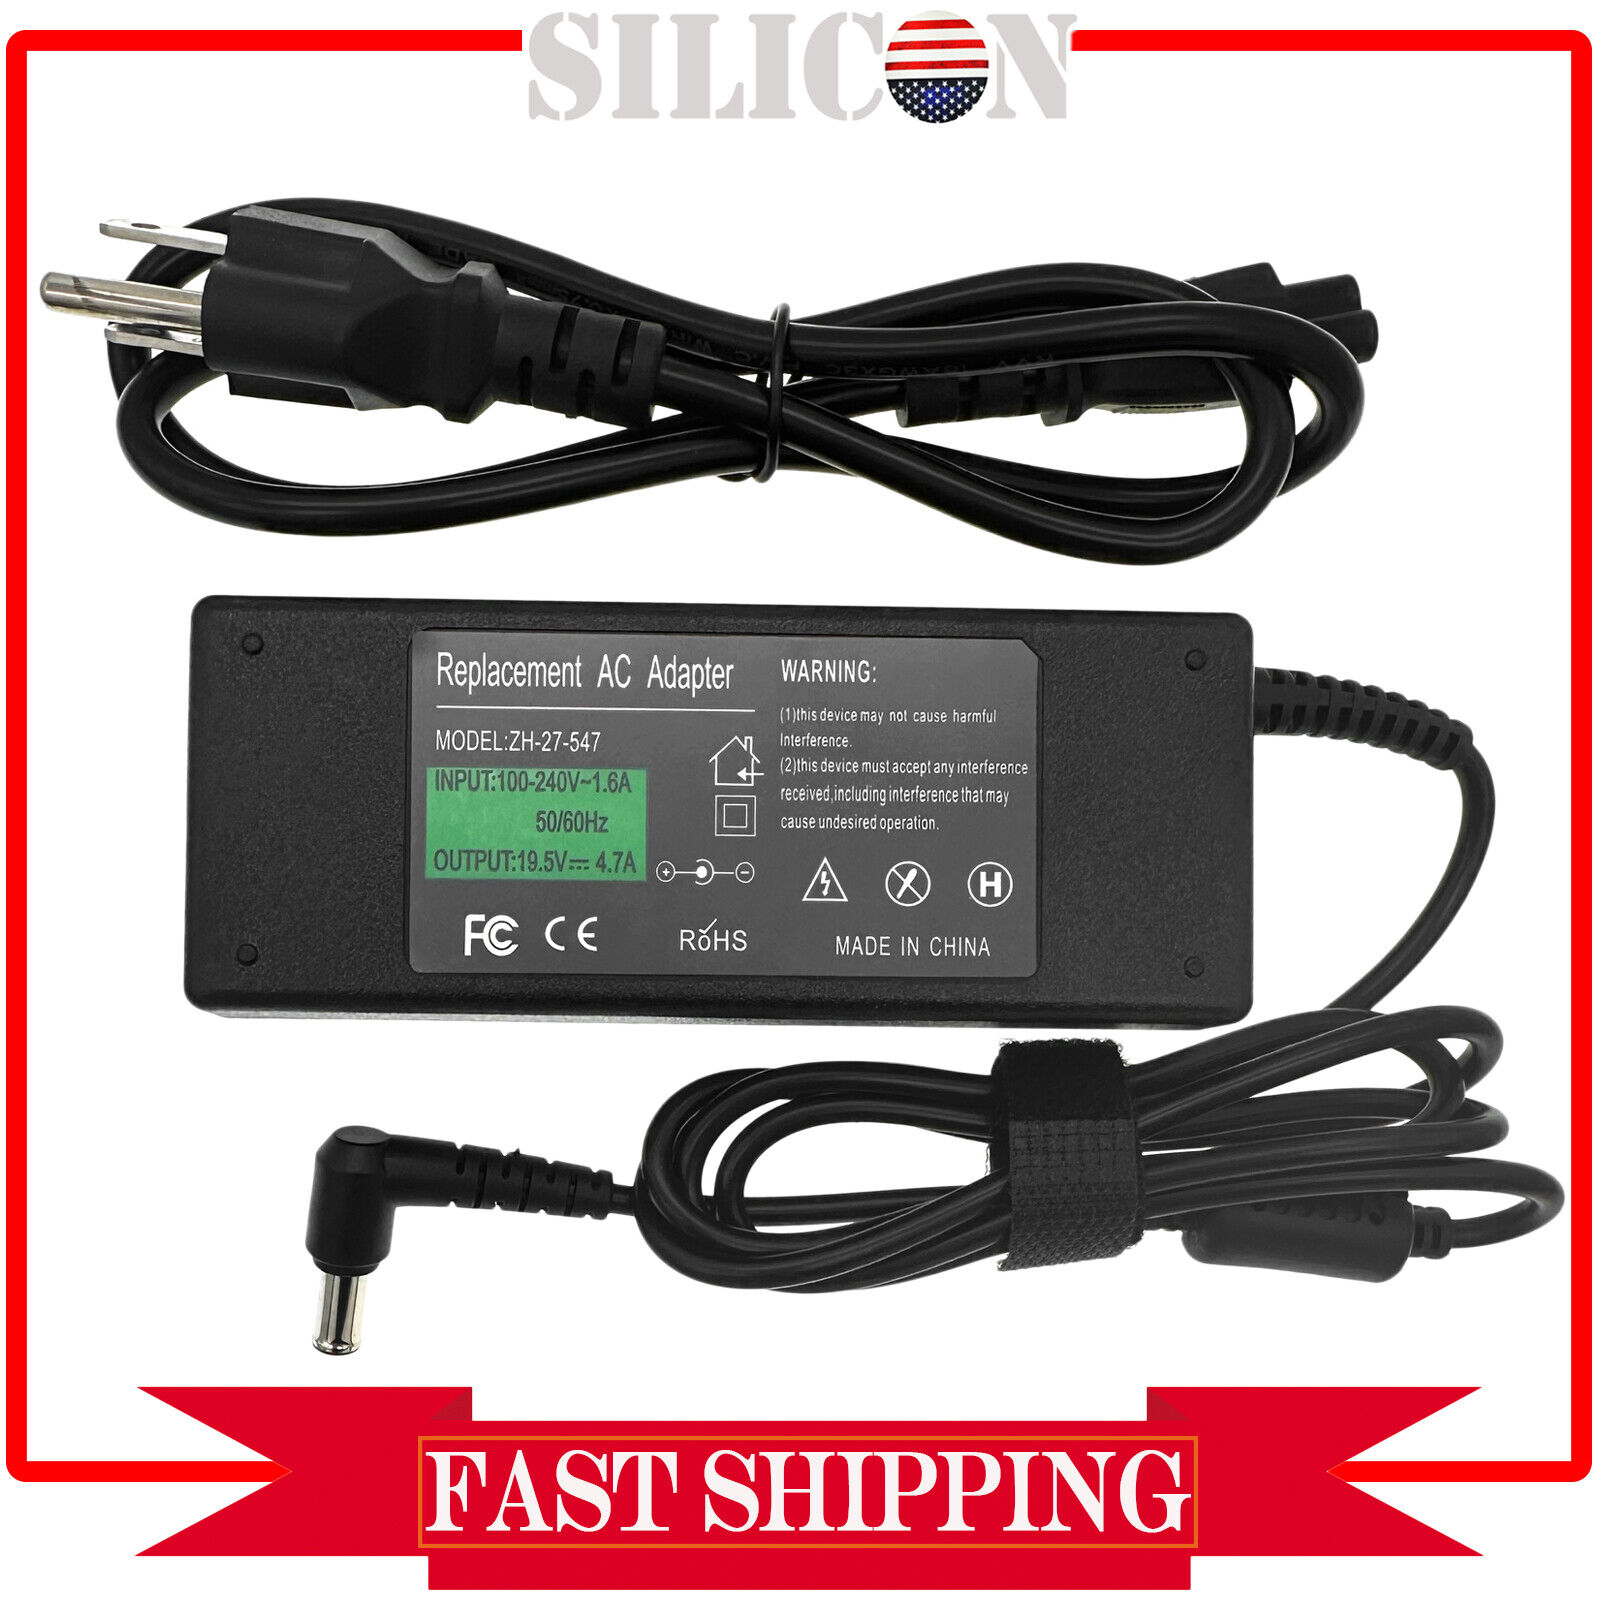 AC Adapter For LG 29WN600-W 34WN650-W 24GQ50F-B Monitor Power Supply Cable Cord